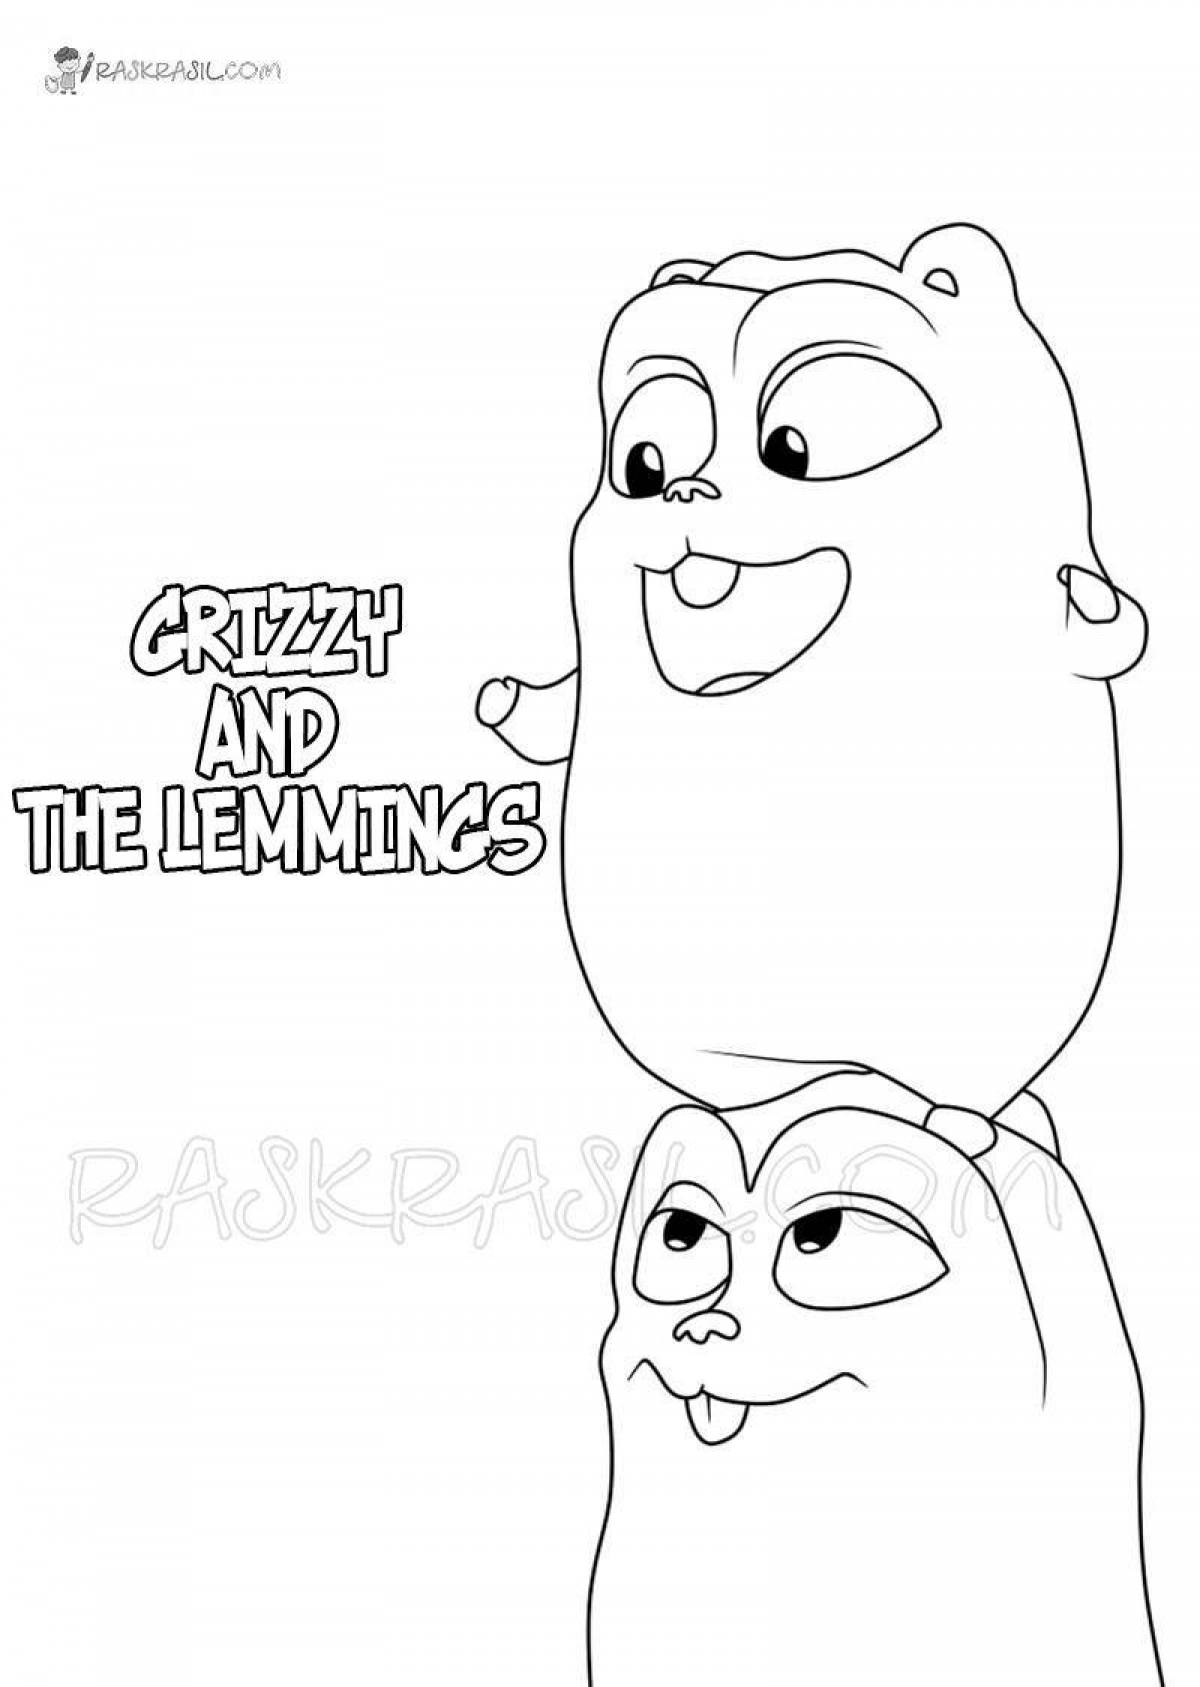 Fun game with grizzlies and lemmings